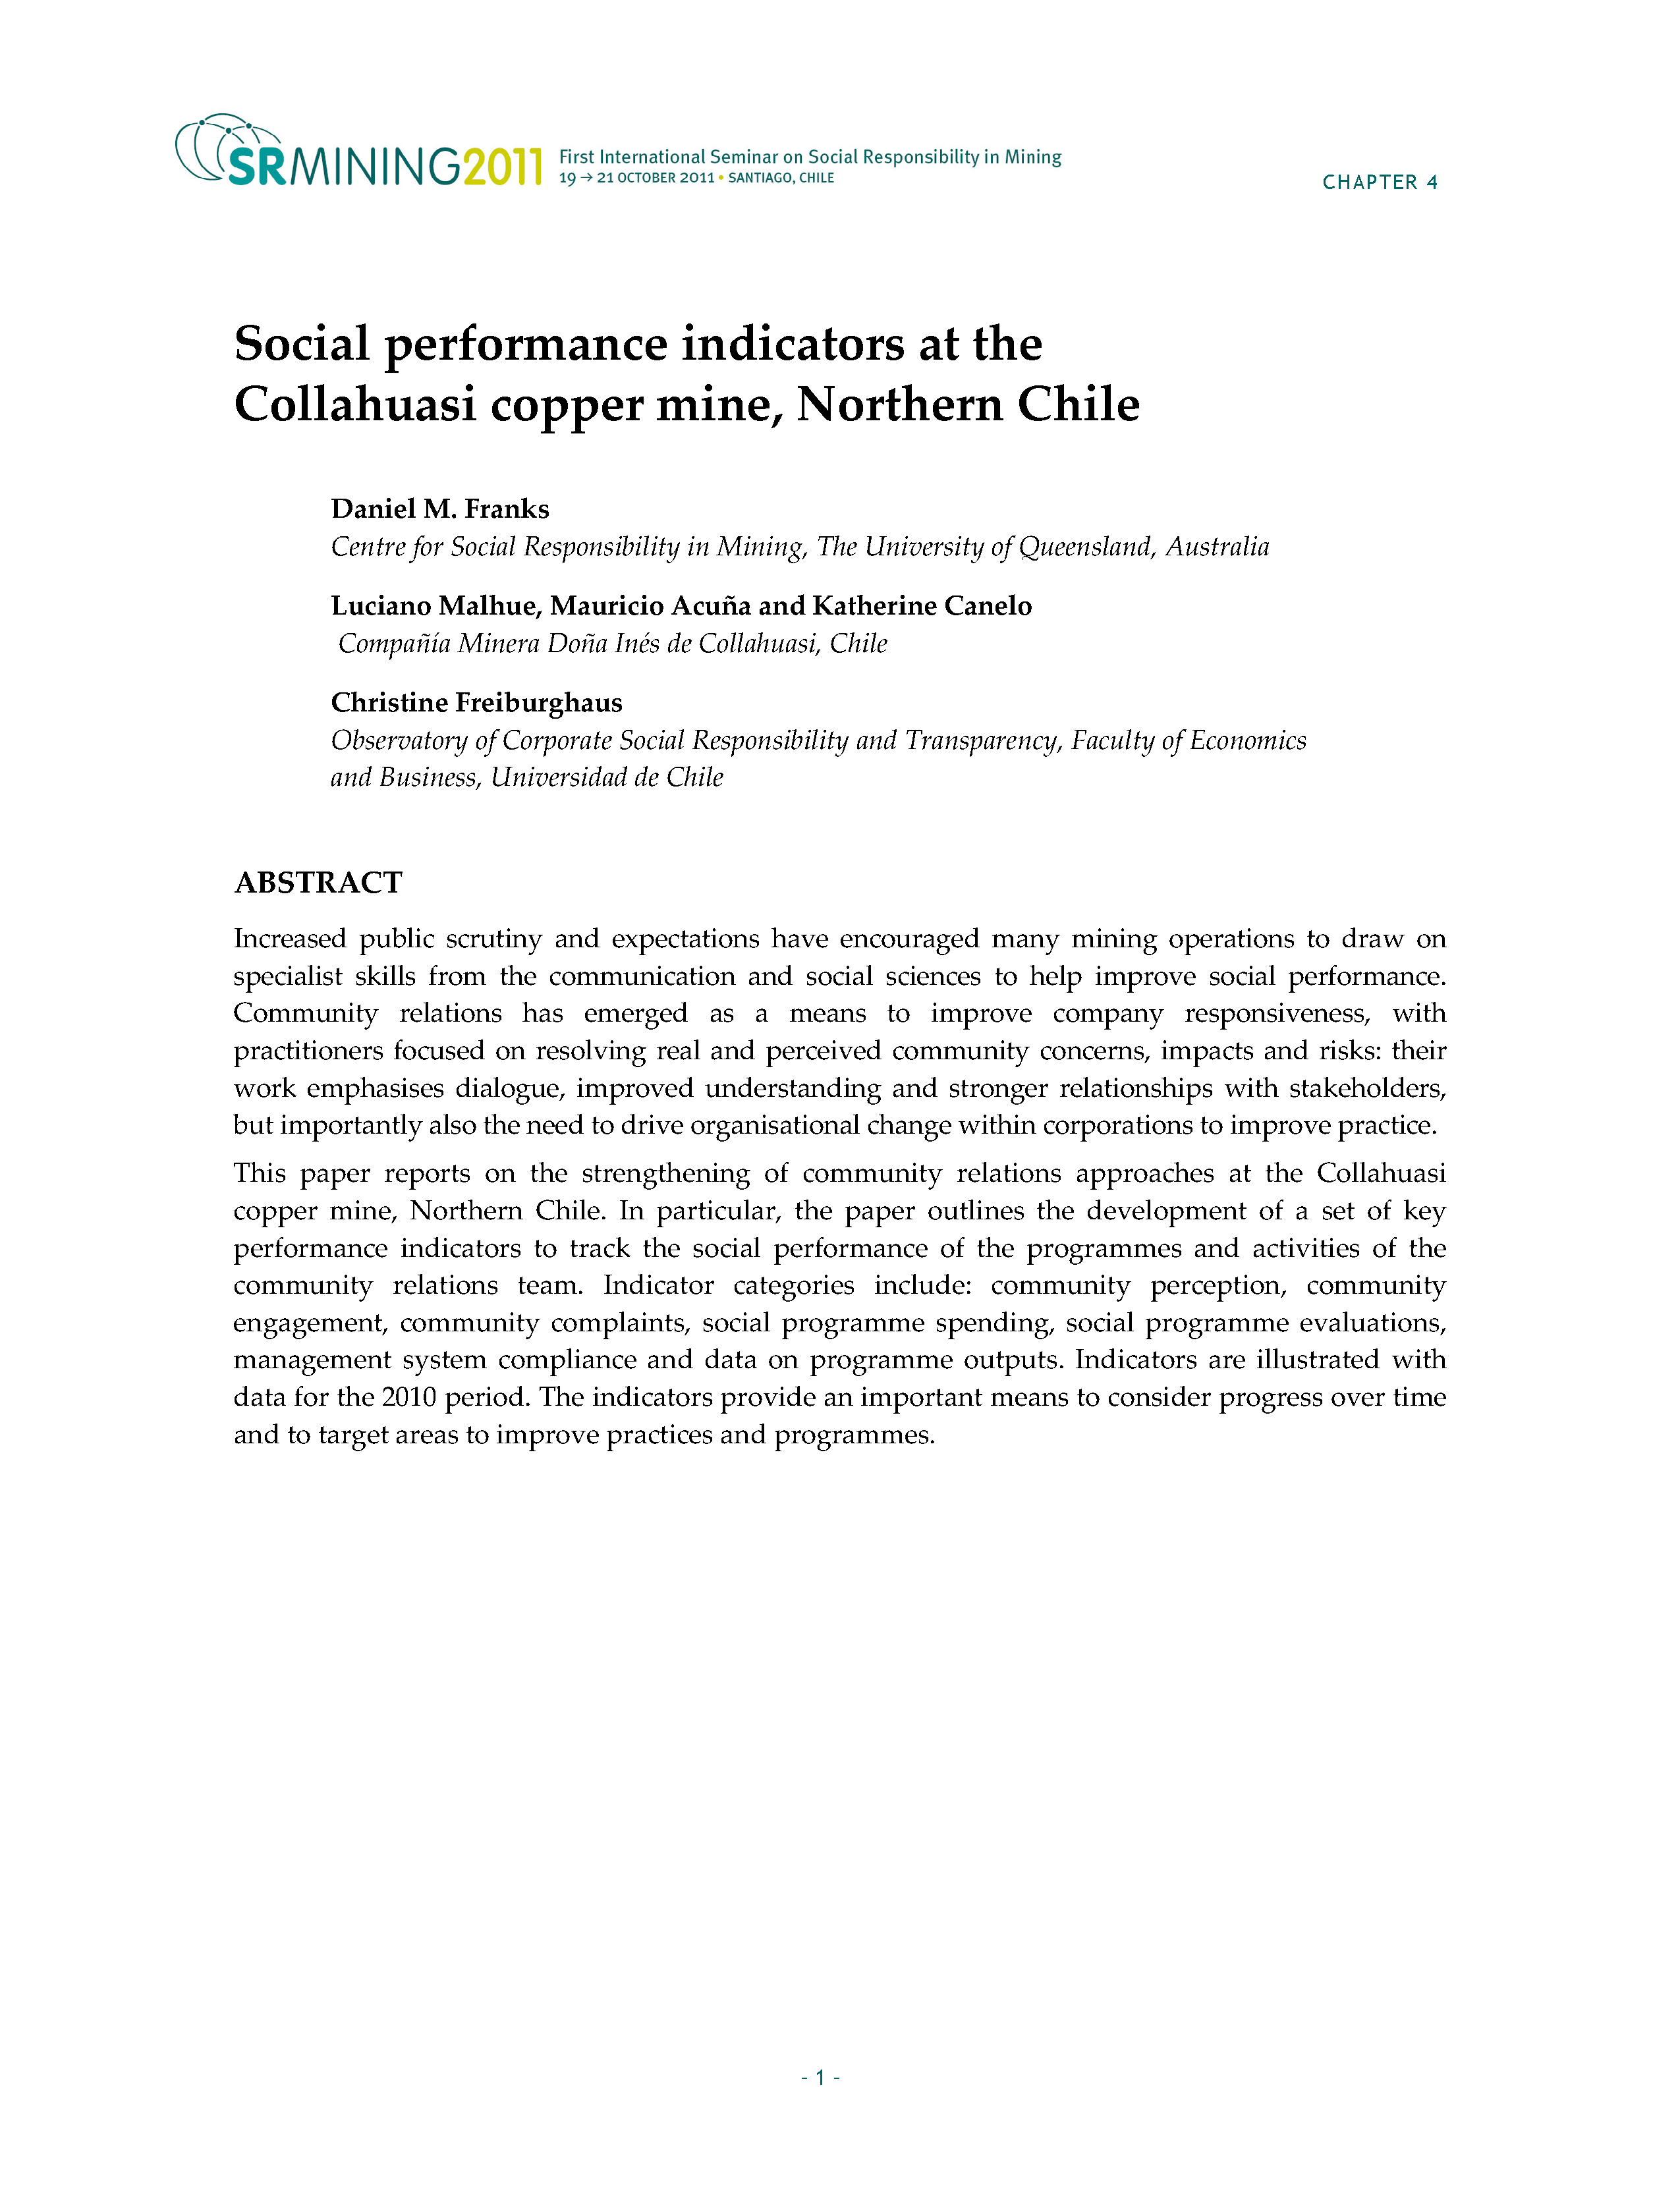 Social performance indicators at the Collahuasi copper mine, Northern Chile